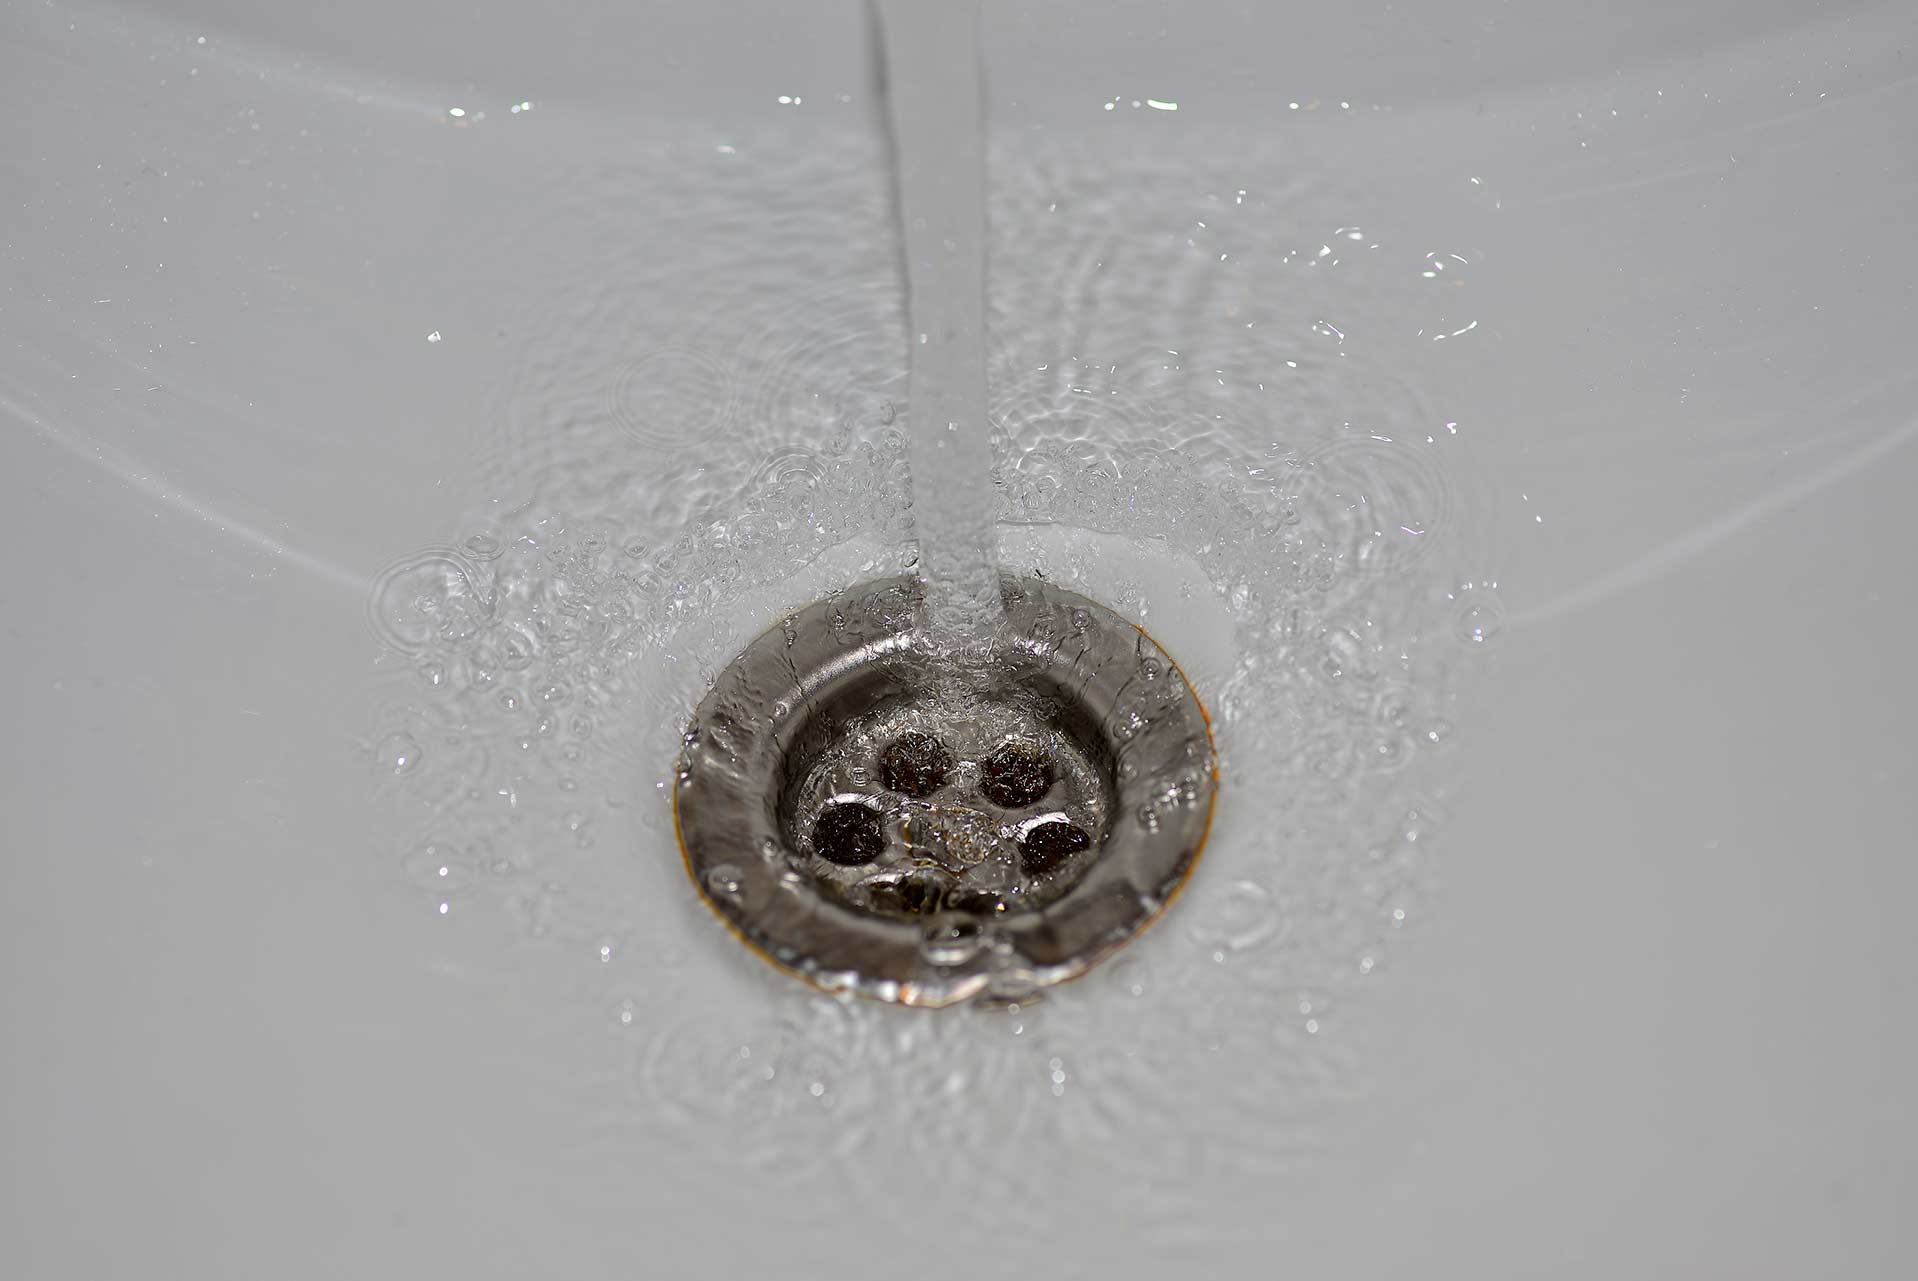 A2B Drains provides services to unblock blocked sinks and drains for properties in West Kensington.